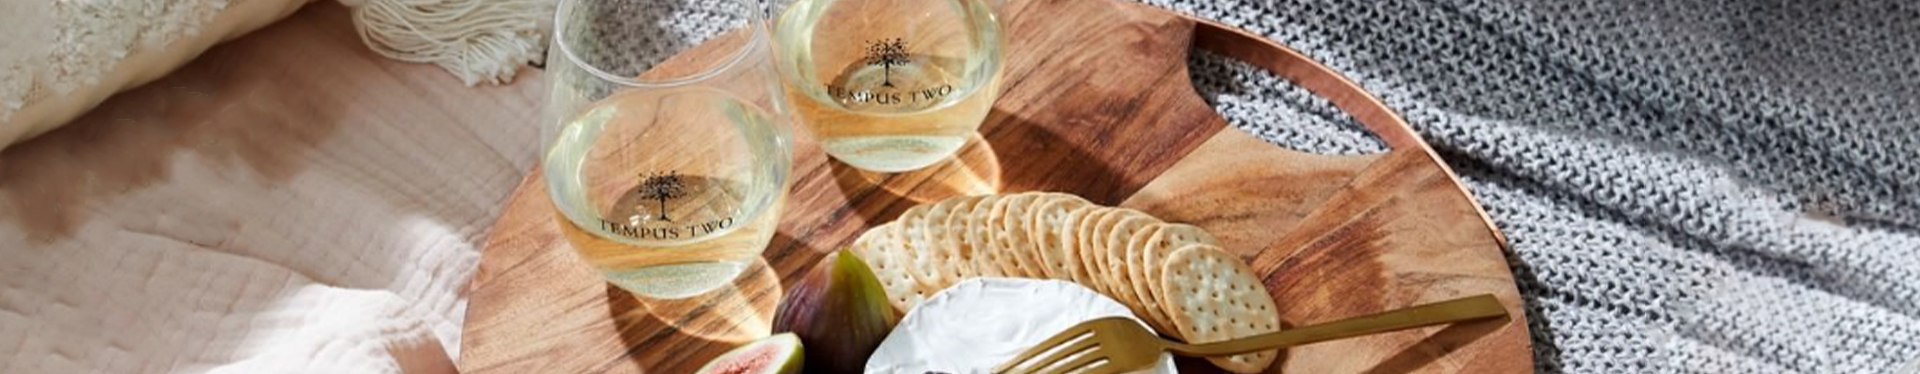 Two glasses of Tempus Two white wine varietal next to a charcuterie board containing cheese, figs and crackers